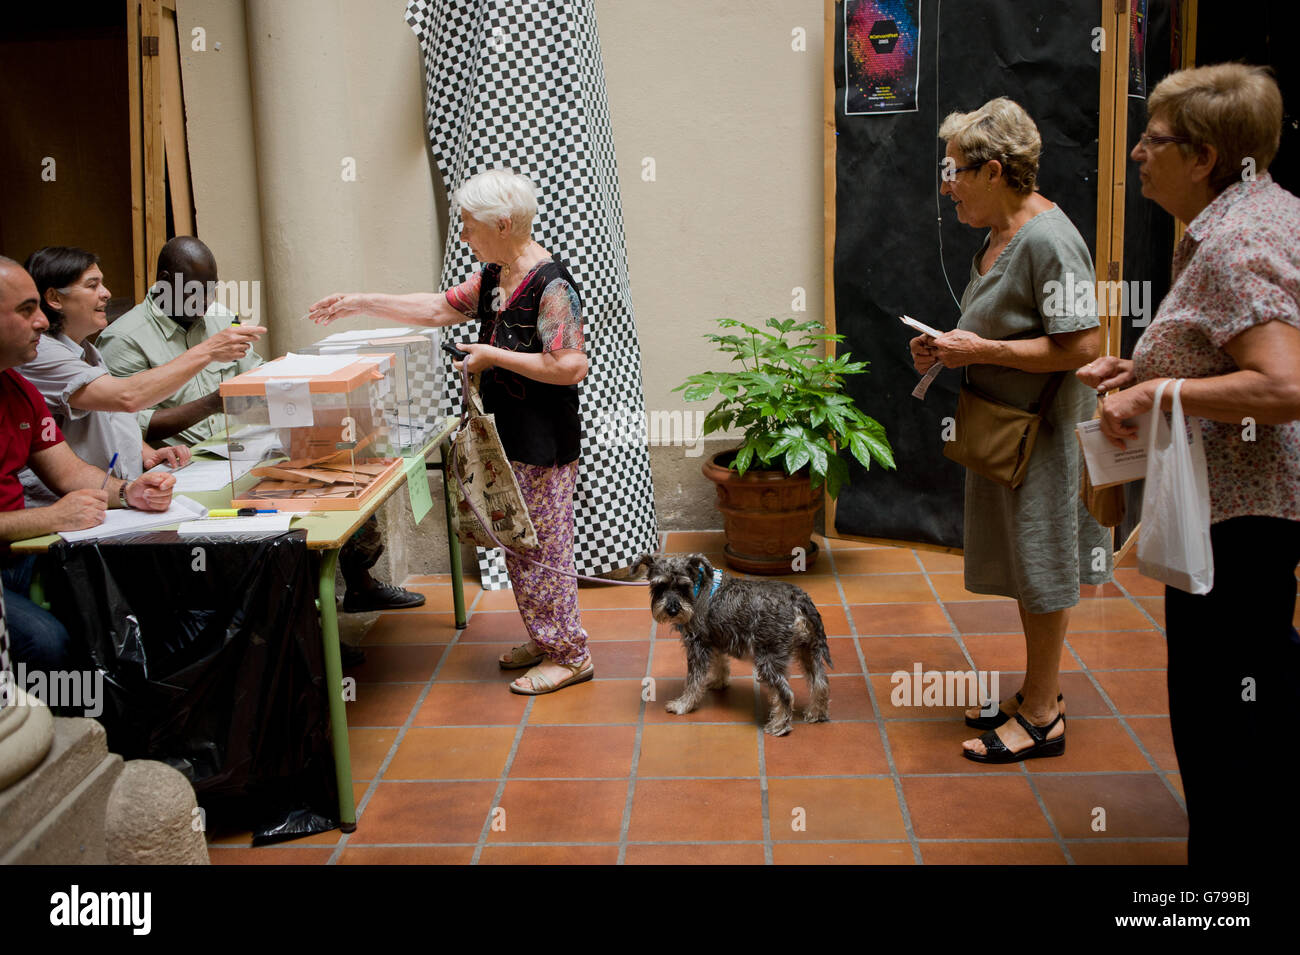 Barcelona, Spain. 26th June, 2016. A woman casts her vote in the national elections in Barcelona, Spain. Spaniards are voting its second general election after six months of caretaker government. Credit:   Jordi Boixareu/Alamy Live News Stock Photo